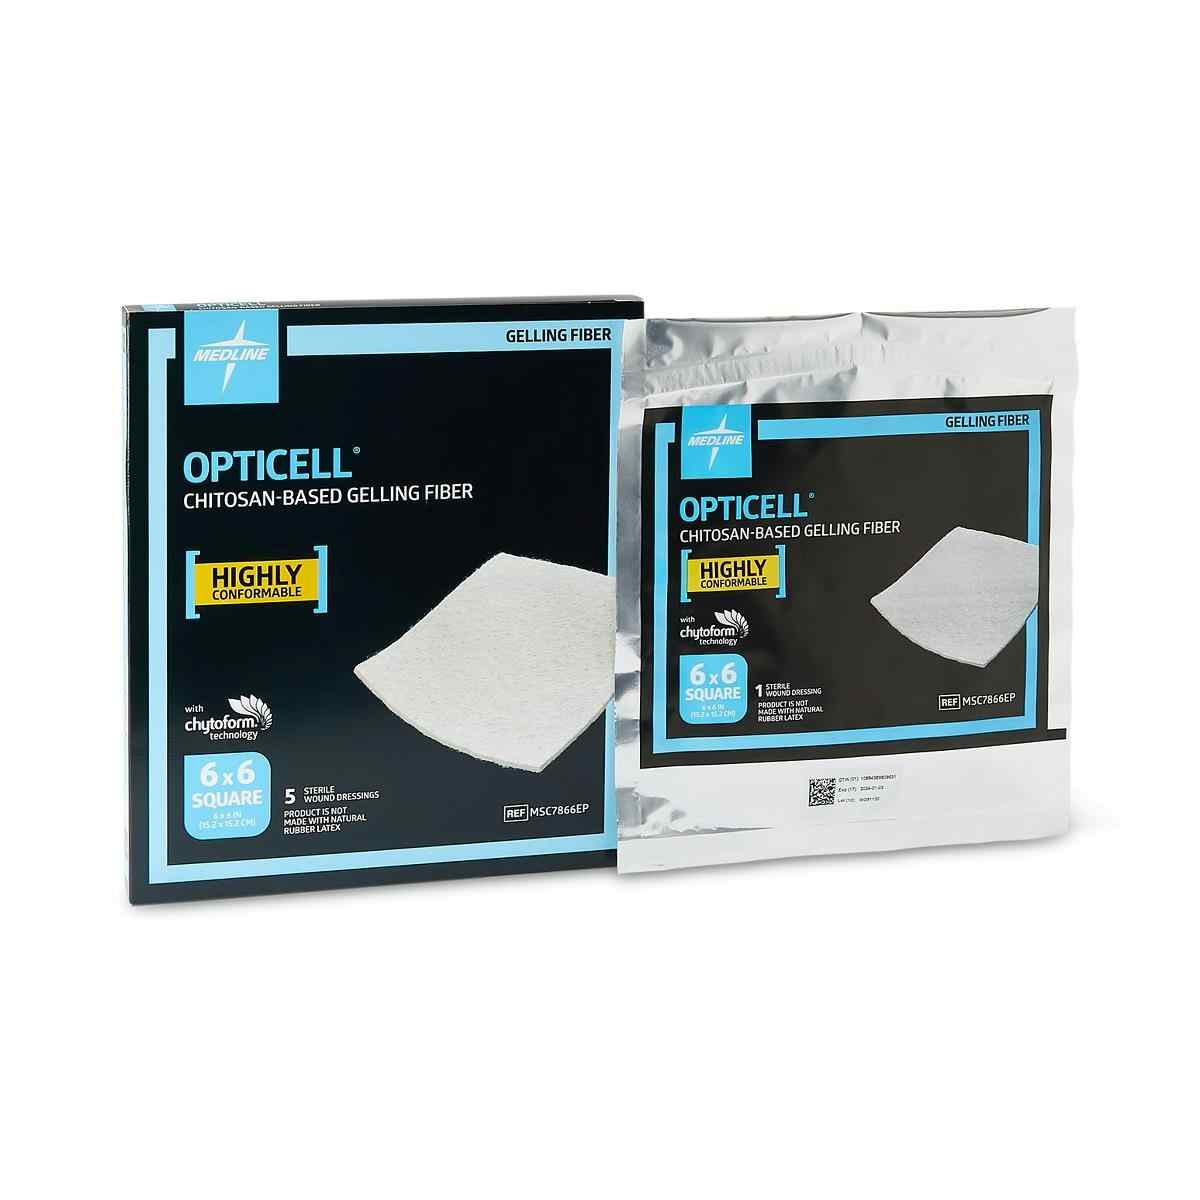 Medline Opticell Chitosan-Based Gelling Fiber Wound Dressing, MSC7866EPZ, 6" X 6" - Box of 5